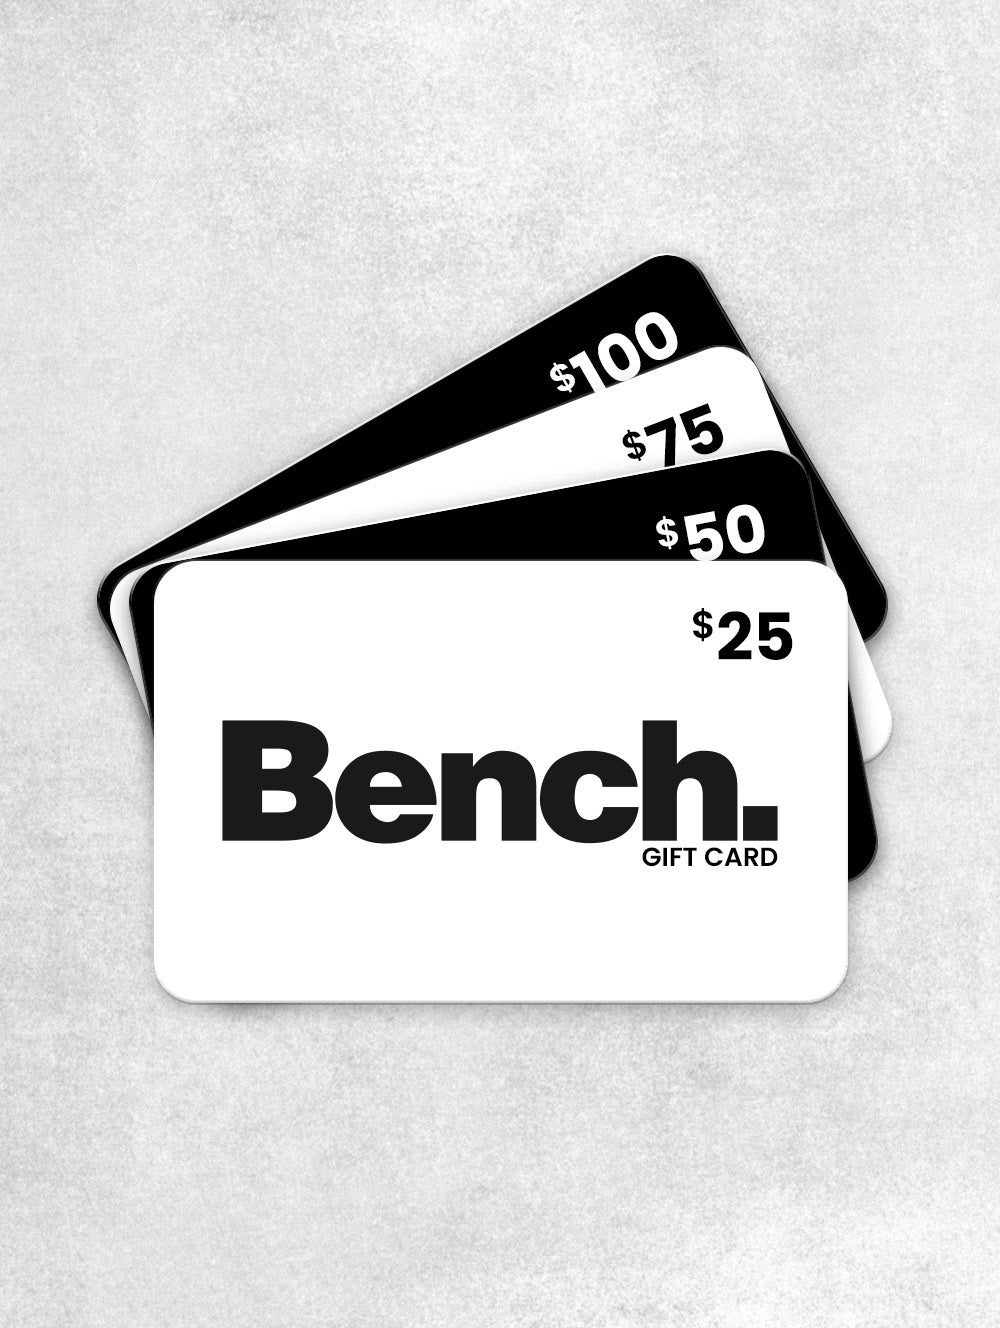 Bench Digital Gift Card - GIFTCARD